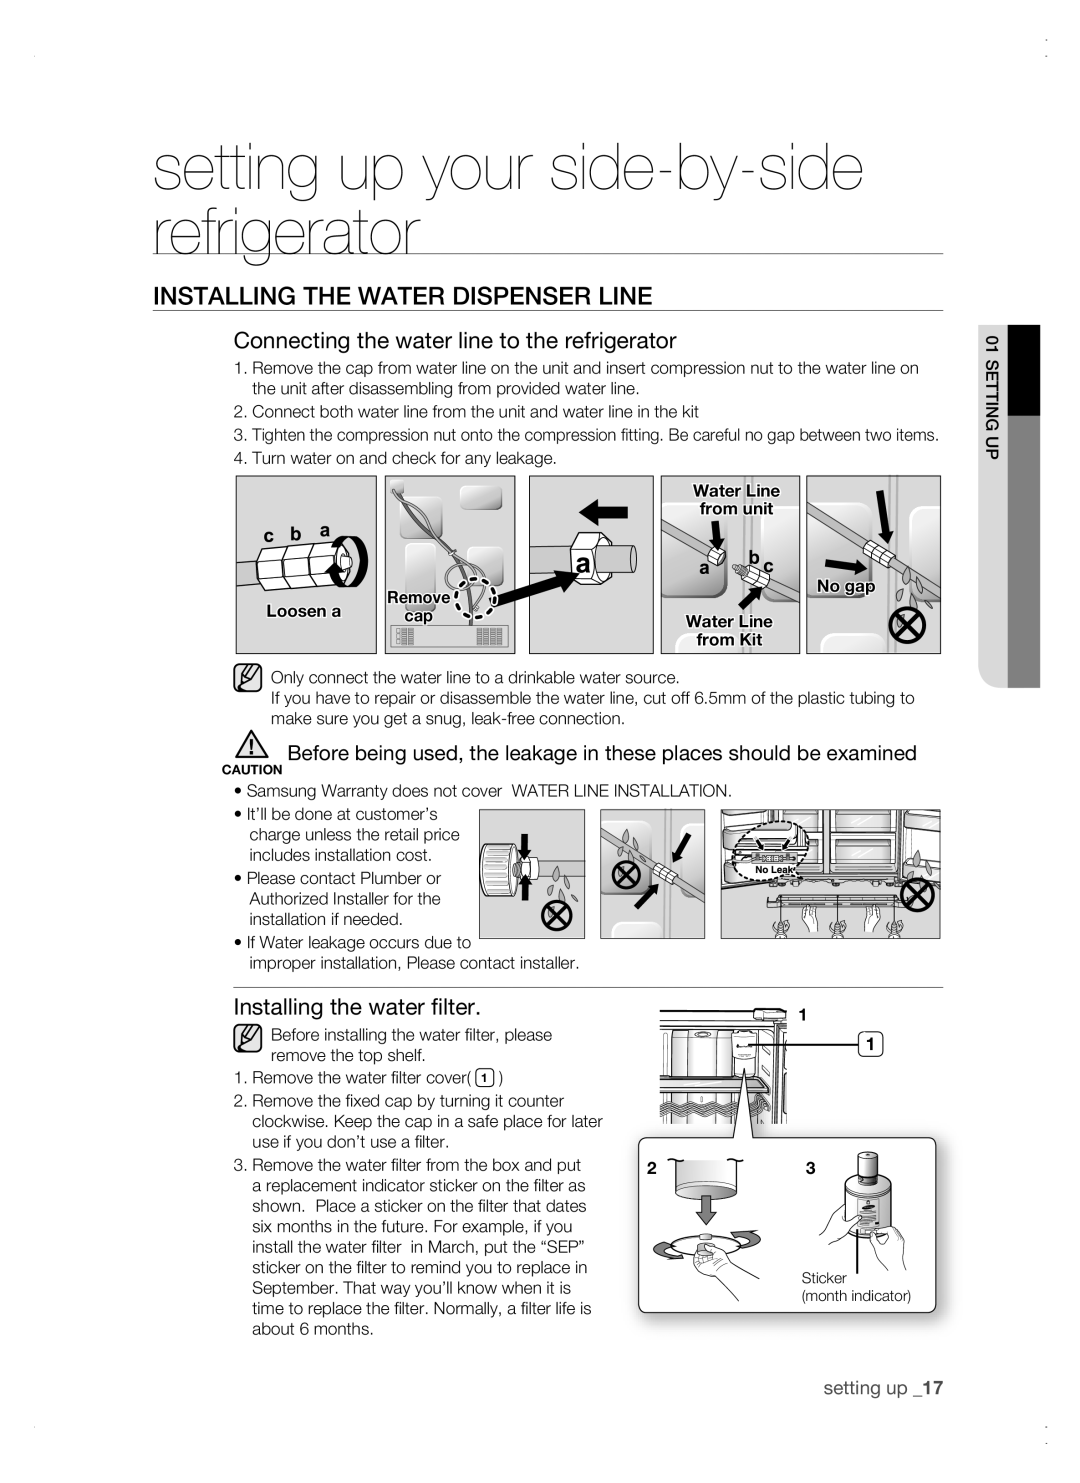 Samsung RSG5 user manual Installing the water dispenser line, Connecting the water line to the refrigerator, setting up 